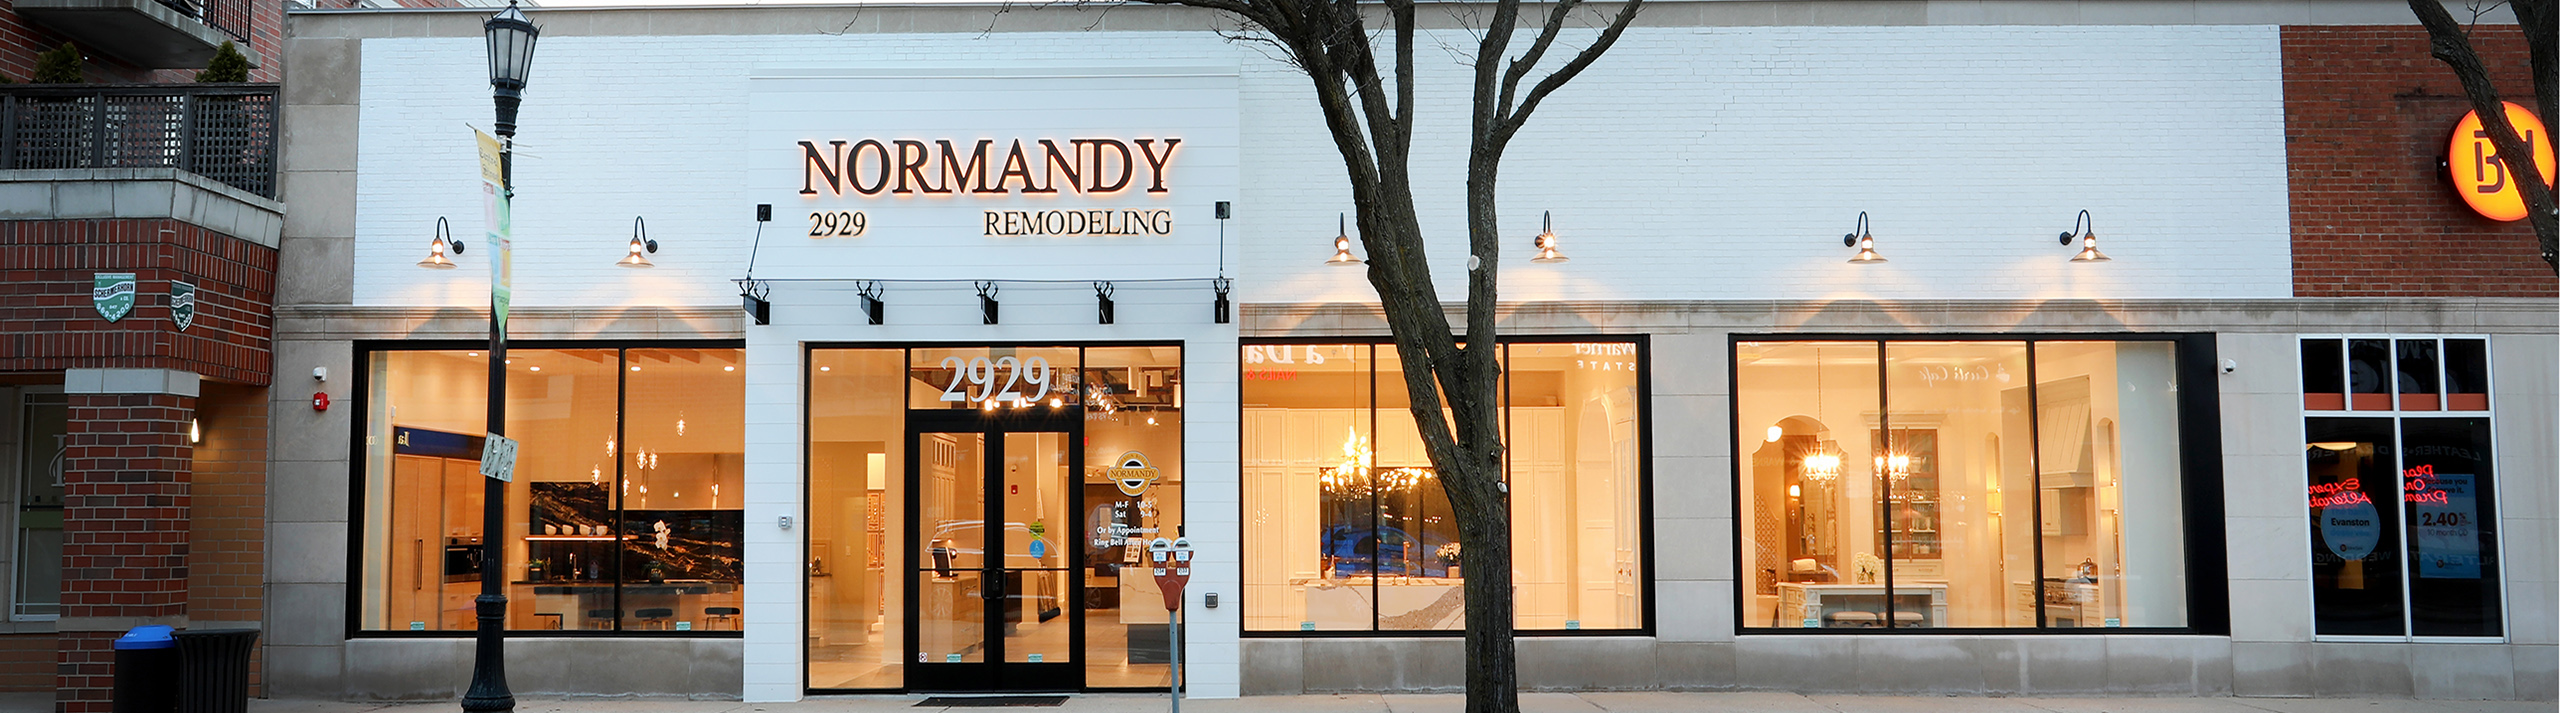 Normandy Remodeling North Shore Design Studio and Showroom